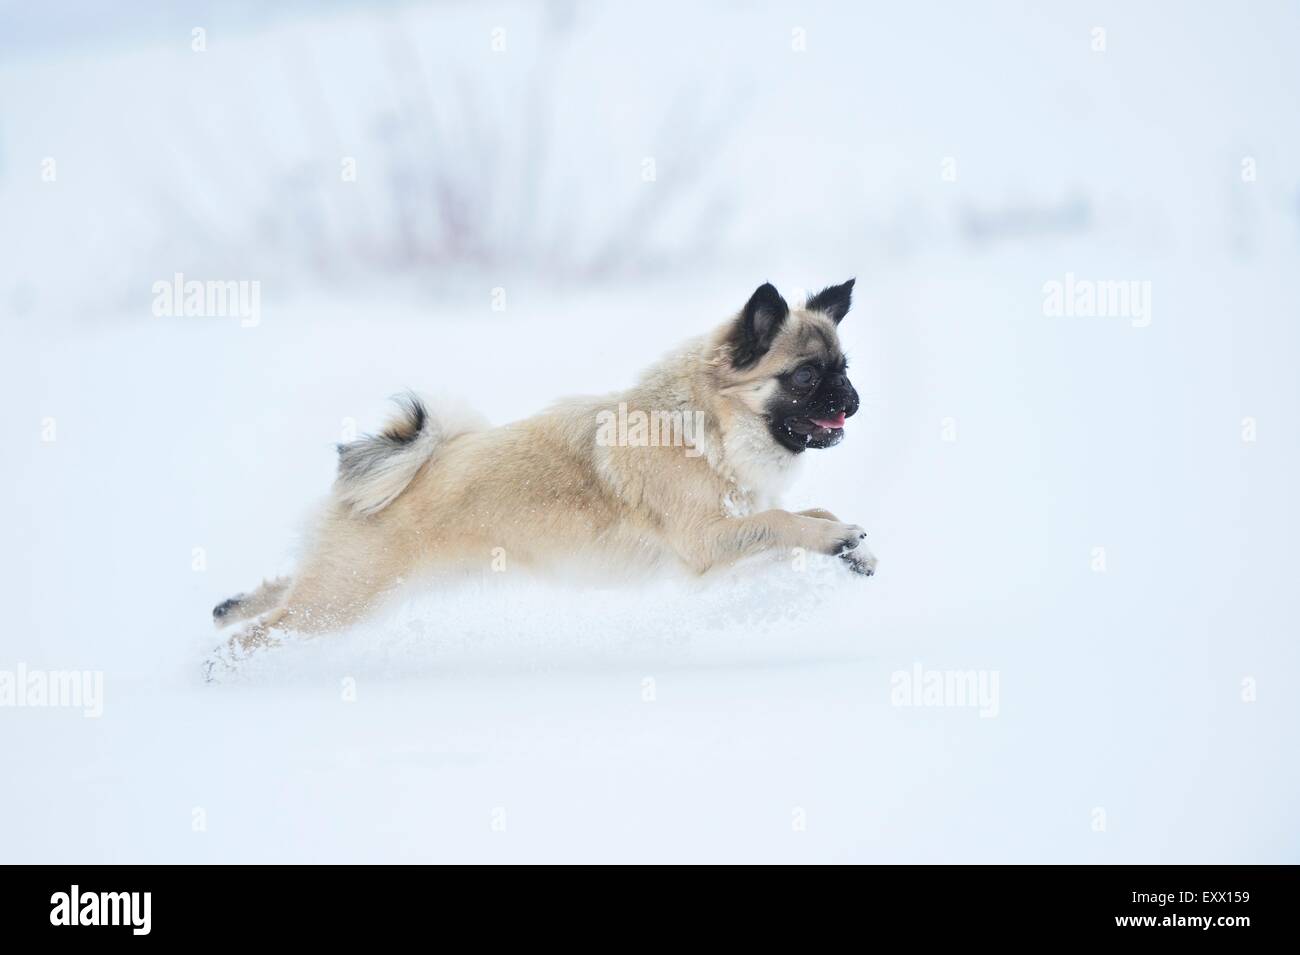 Chihuahua and pug mix dog running in snow Stock Photo